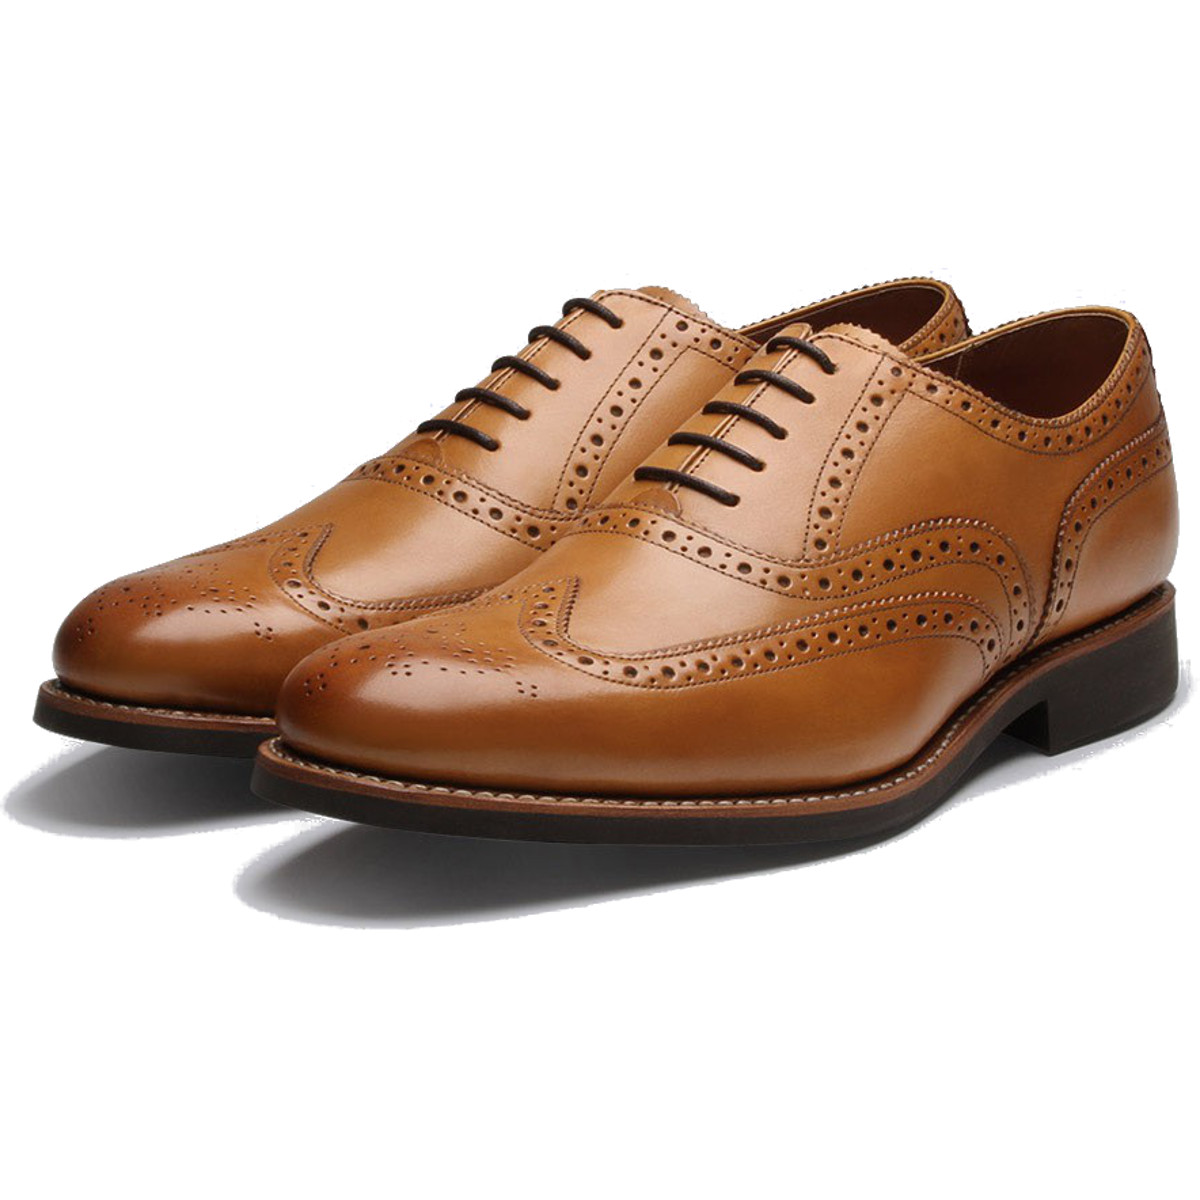 grenson dylan shoes